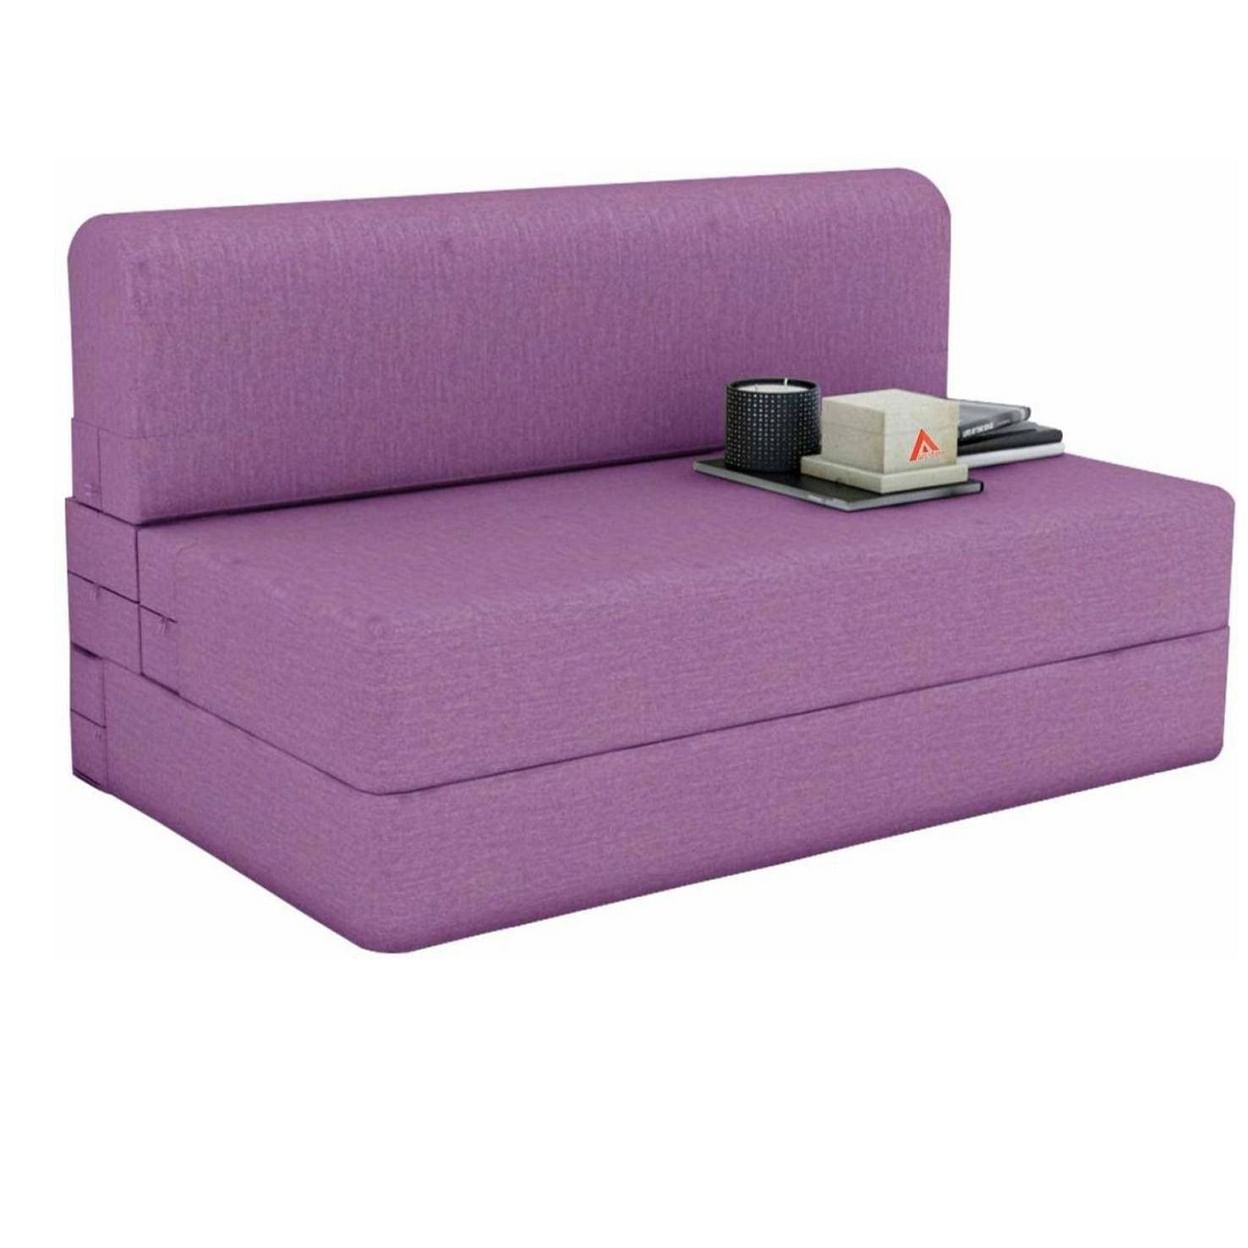 Hout Town 2 Seater Double Metal Fold Out Sofa Cum Bed Price in